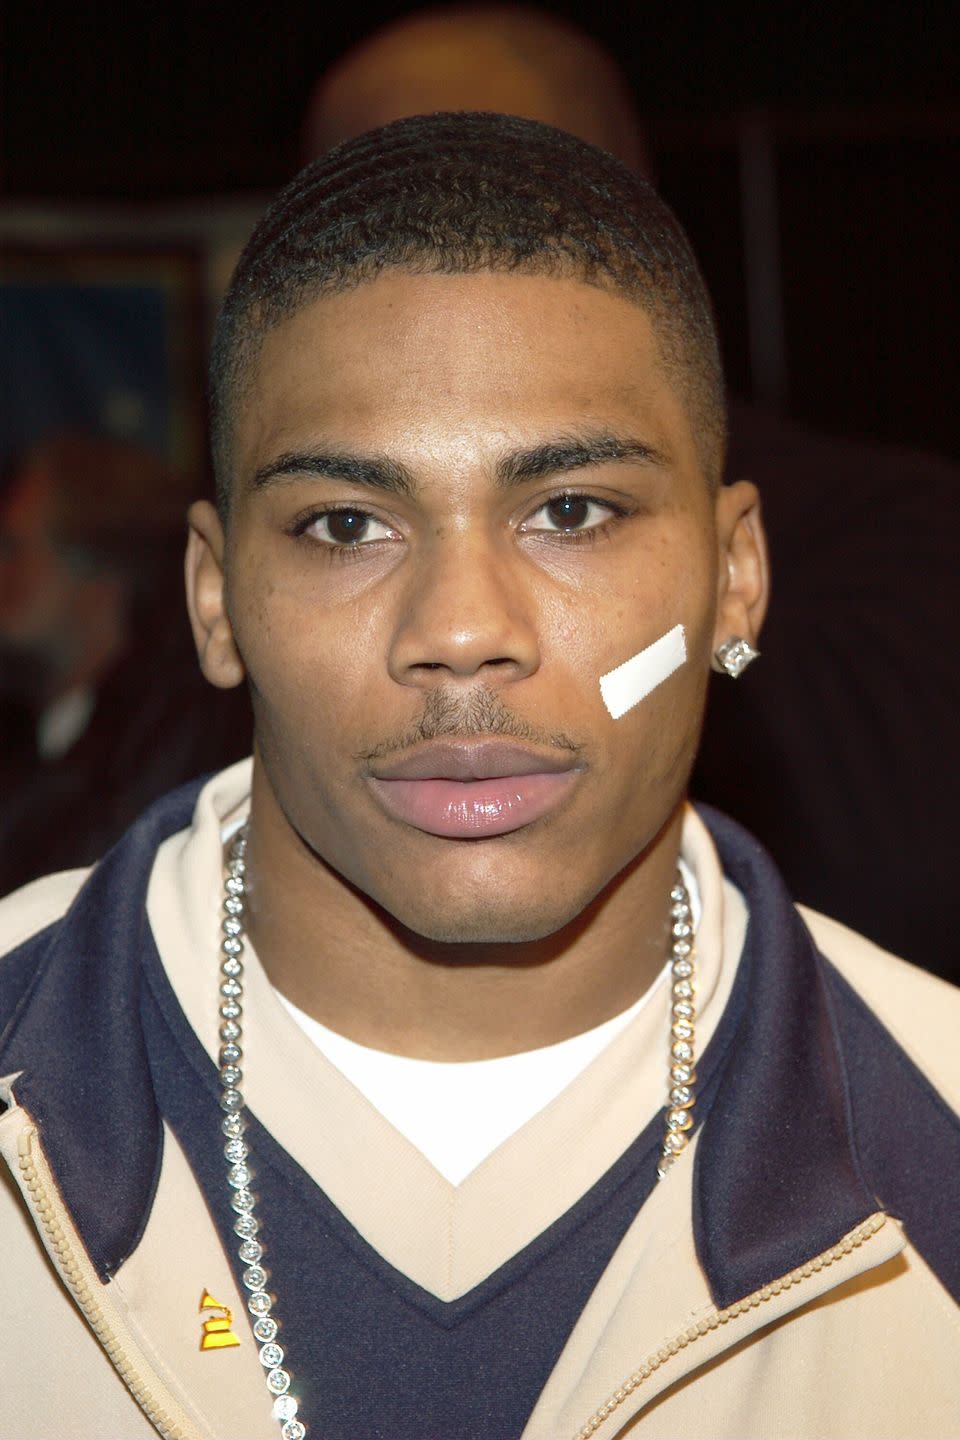 Nelly's Band-Aid